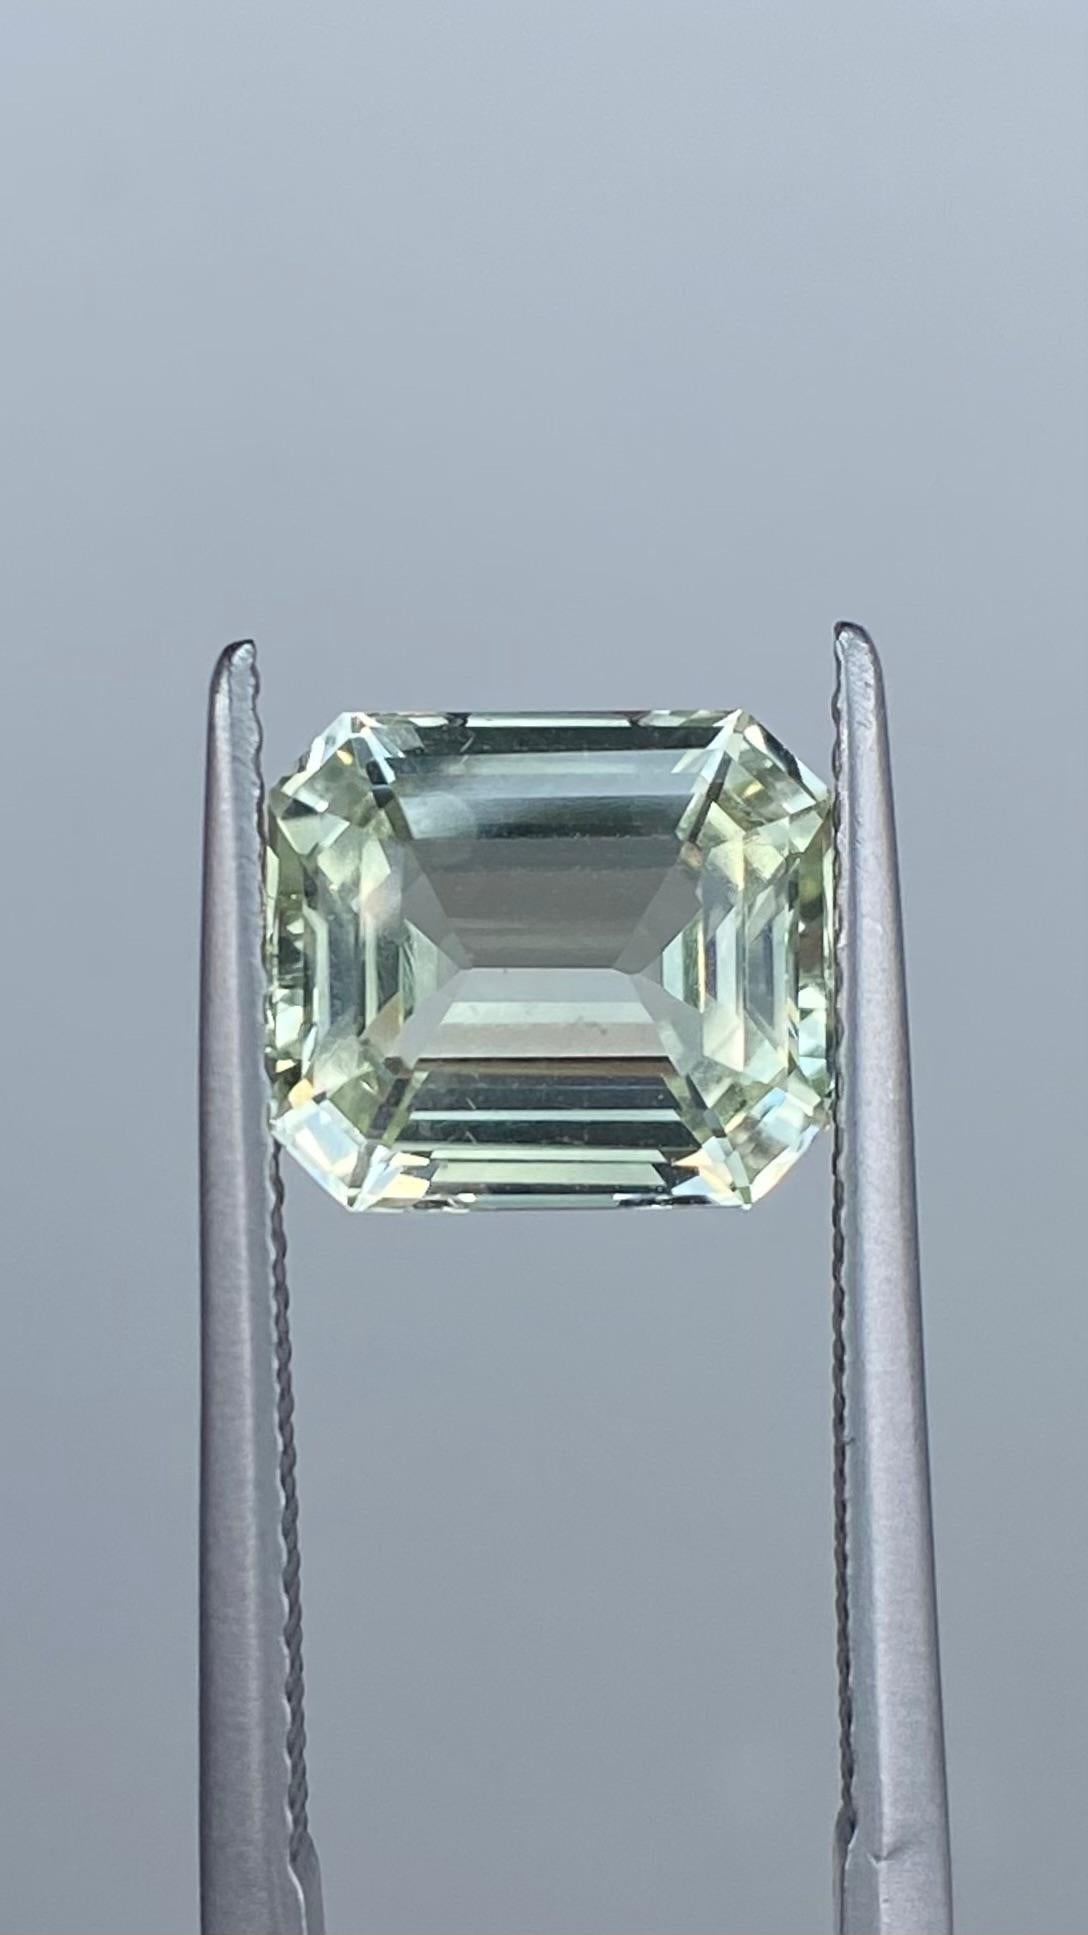 The Sapphire Merchant proudly presents this enchanting natural beauty, a Mint Pastel Green Sapphire, sourced from the gem-rich lands of Sri Lanka (Ceylon). Weighing in at 3.55 carats, its clean emerald cut showcases its subtle green hue and